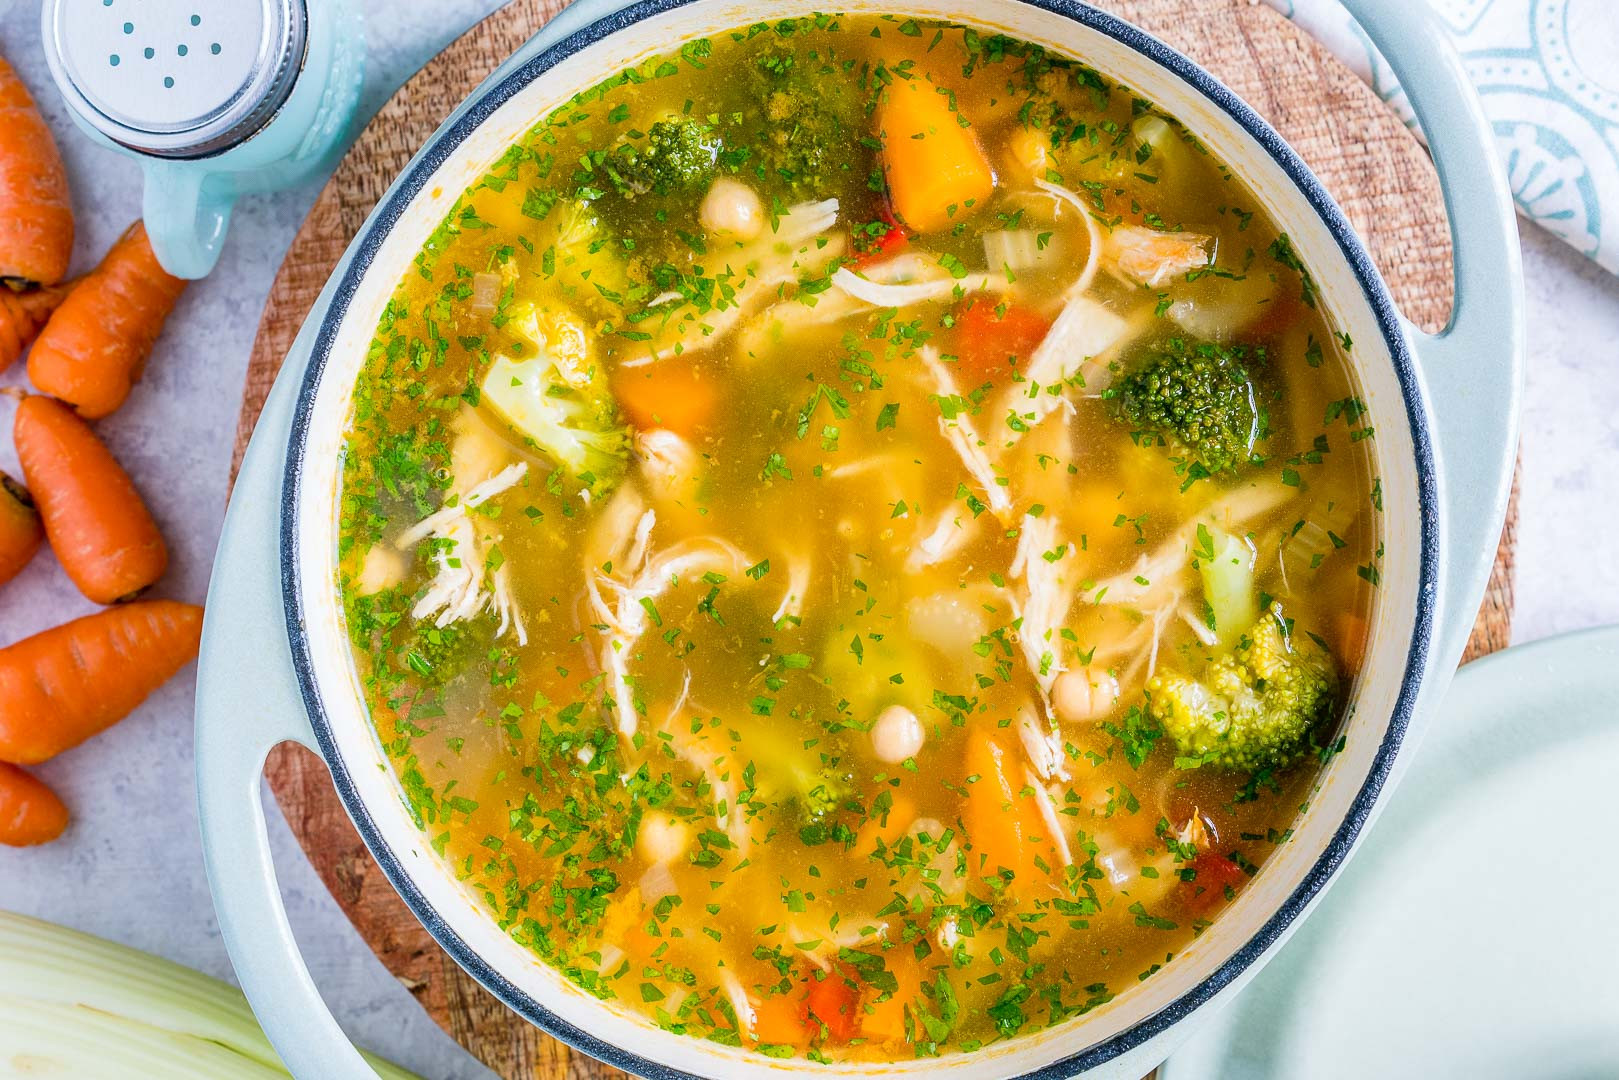 Chicken Broth Soup Recipe
 Eat this Detox Soup to Lower Inflammation and Shed Water